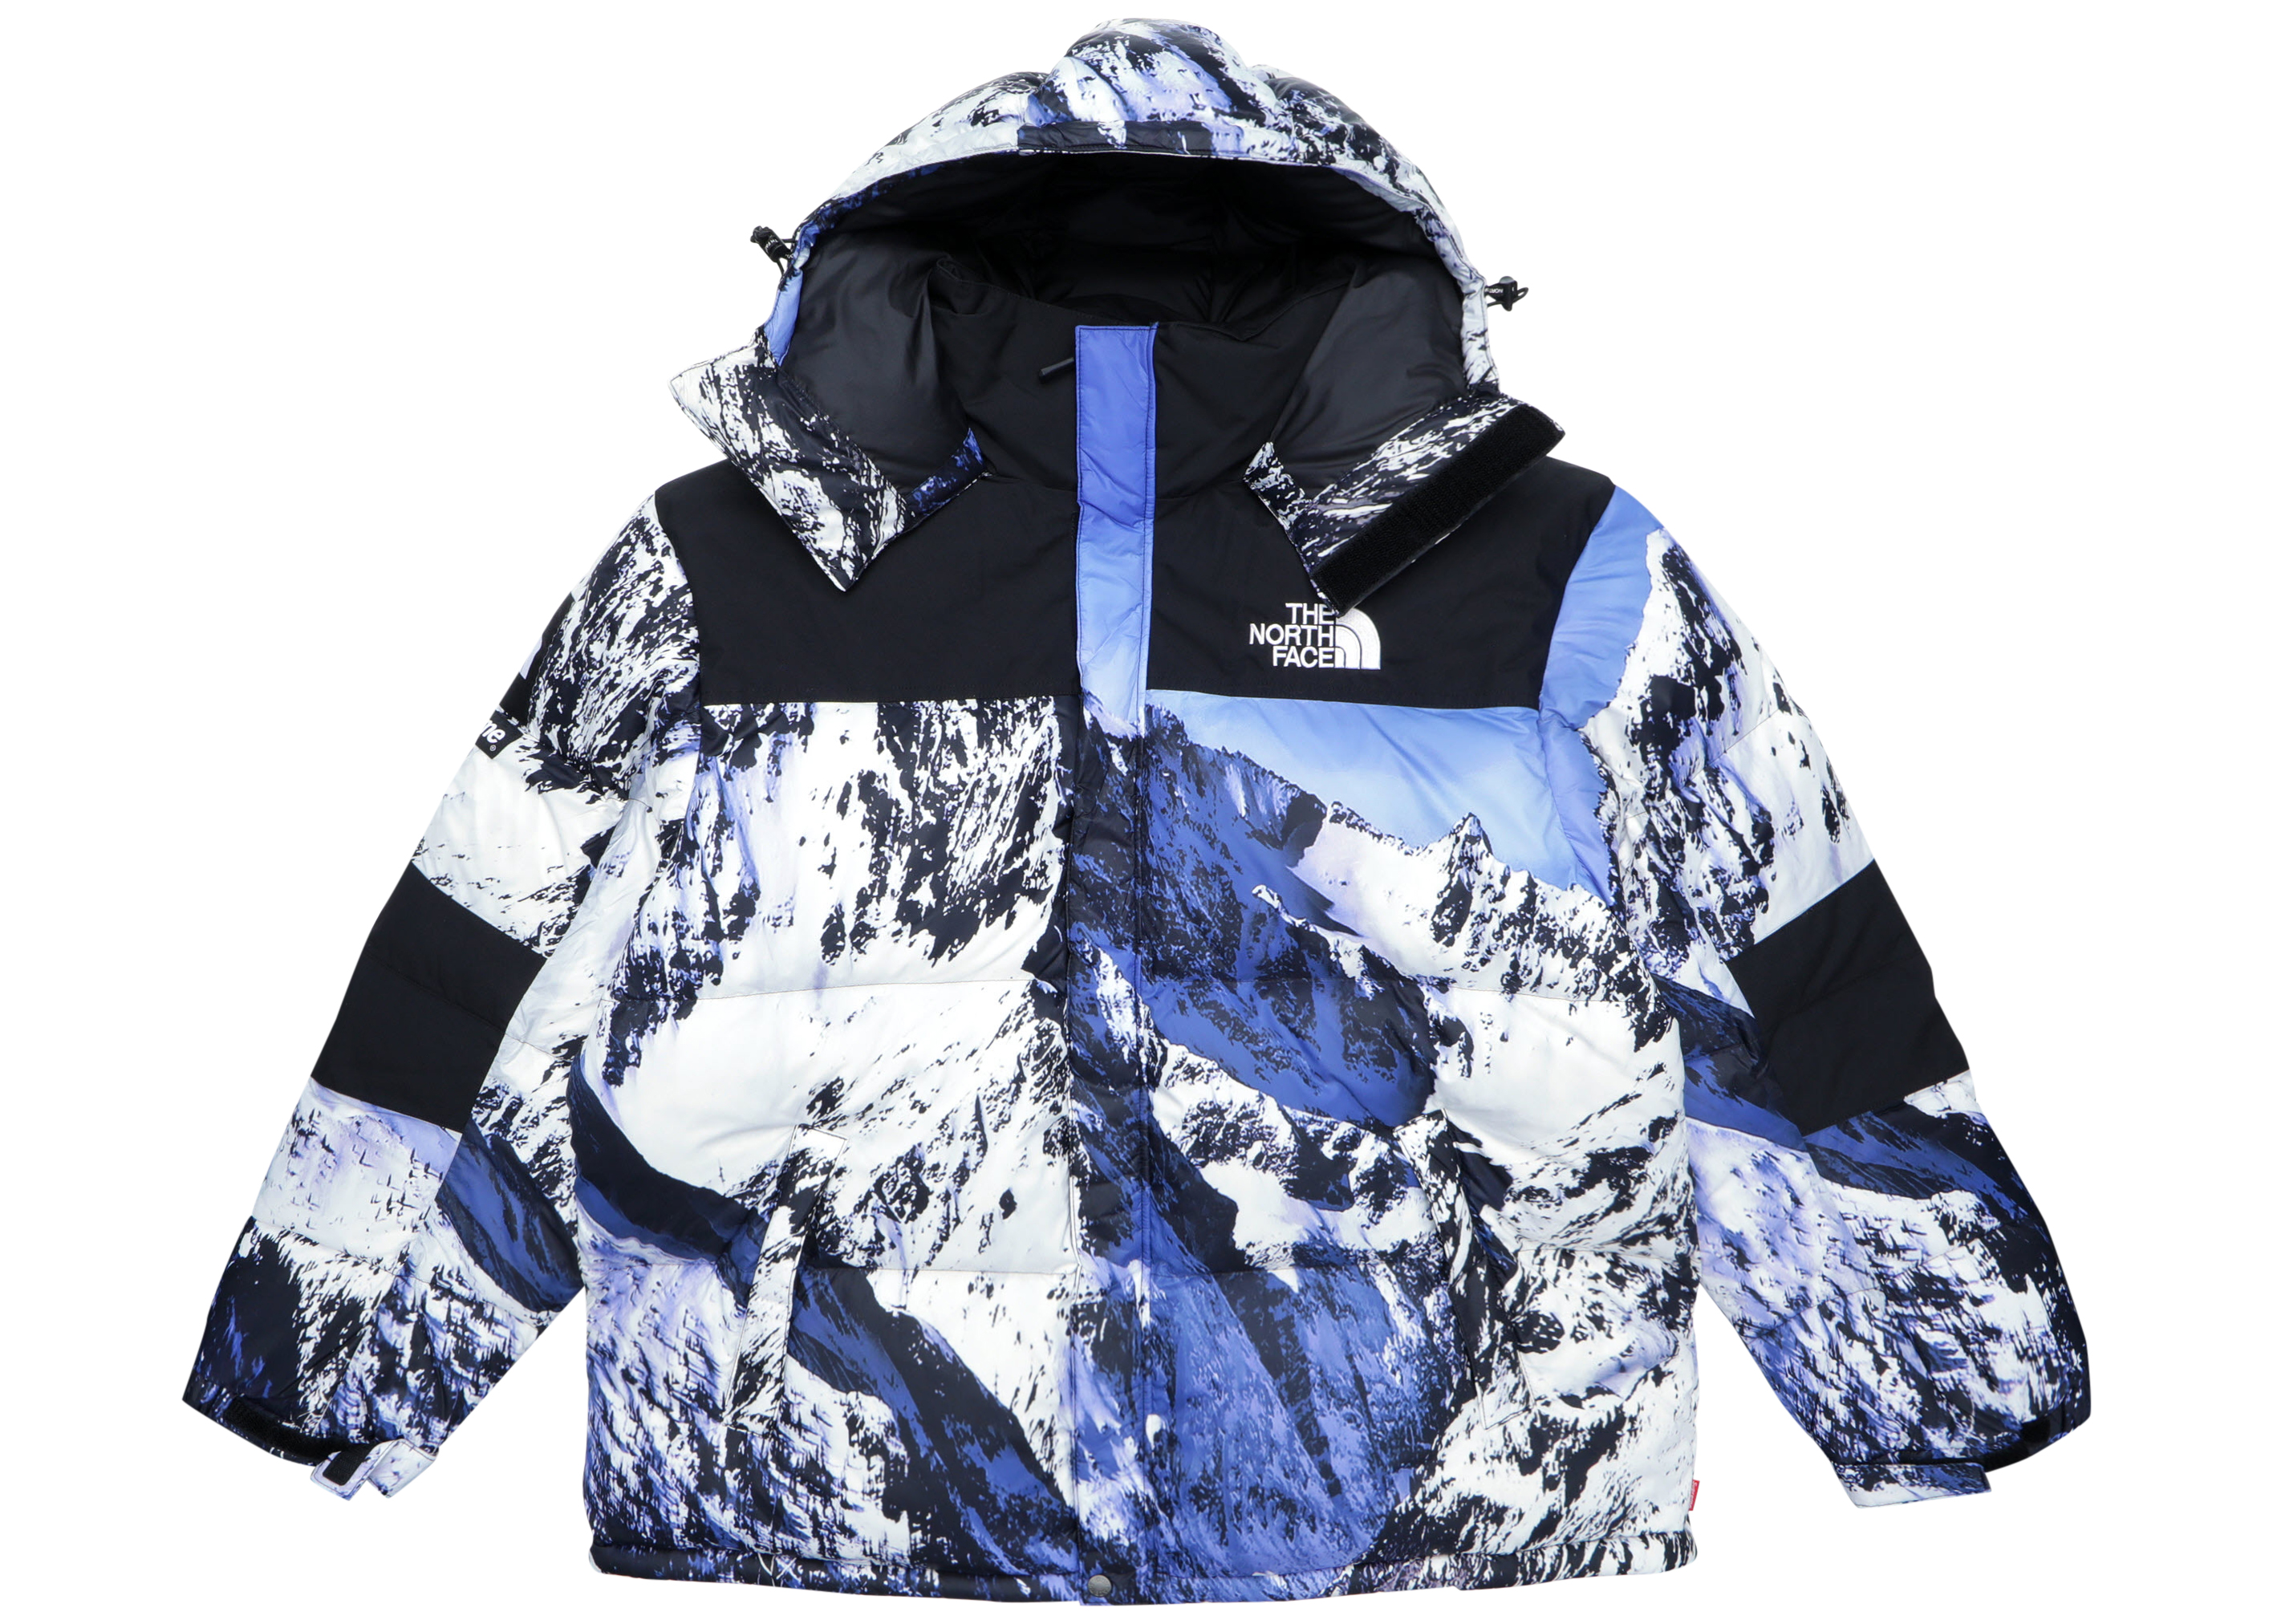 The North Face Mountain Jacket Deals, 53% OFF | www.ingeniovirtual.com